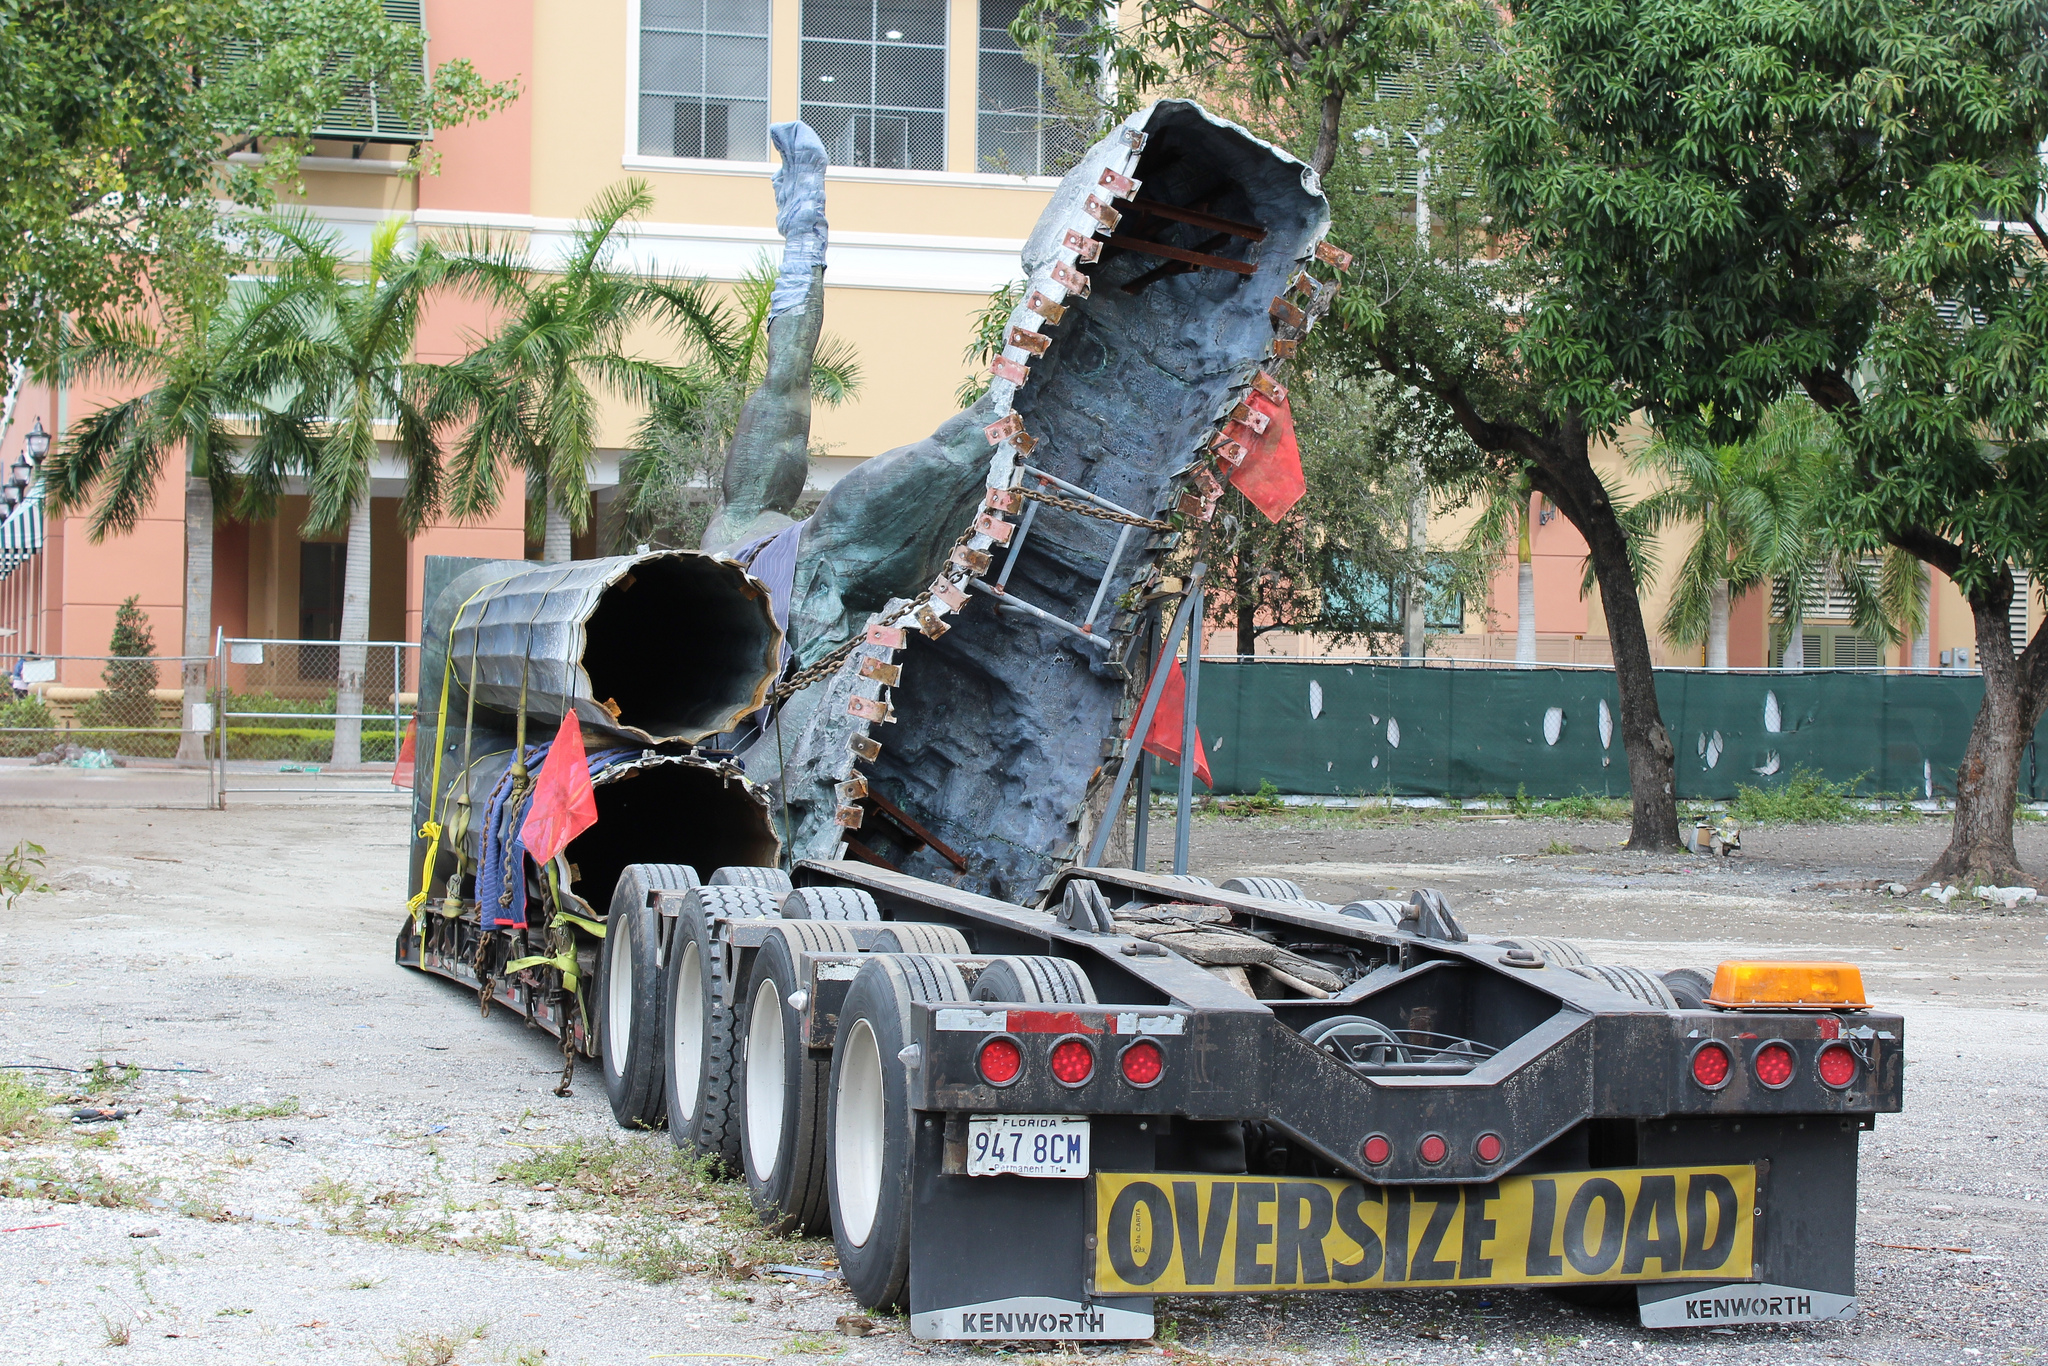 Mary Brickell Village’s Big Bronze Statue of Hercules is Gone